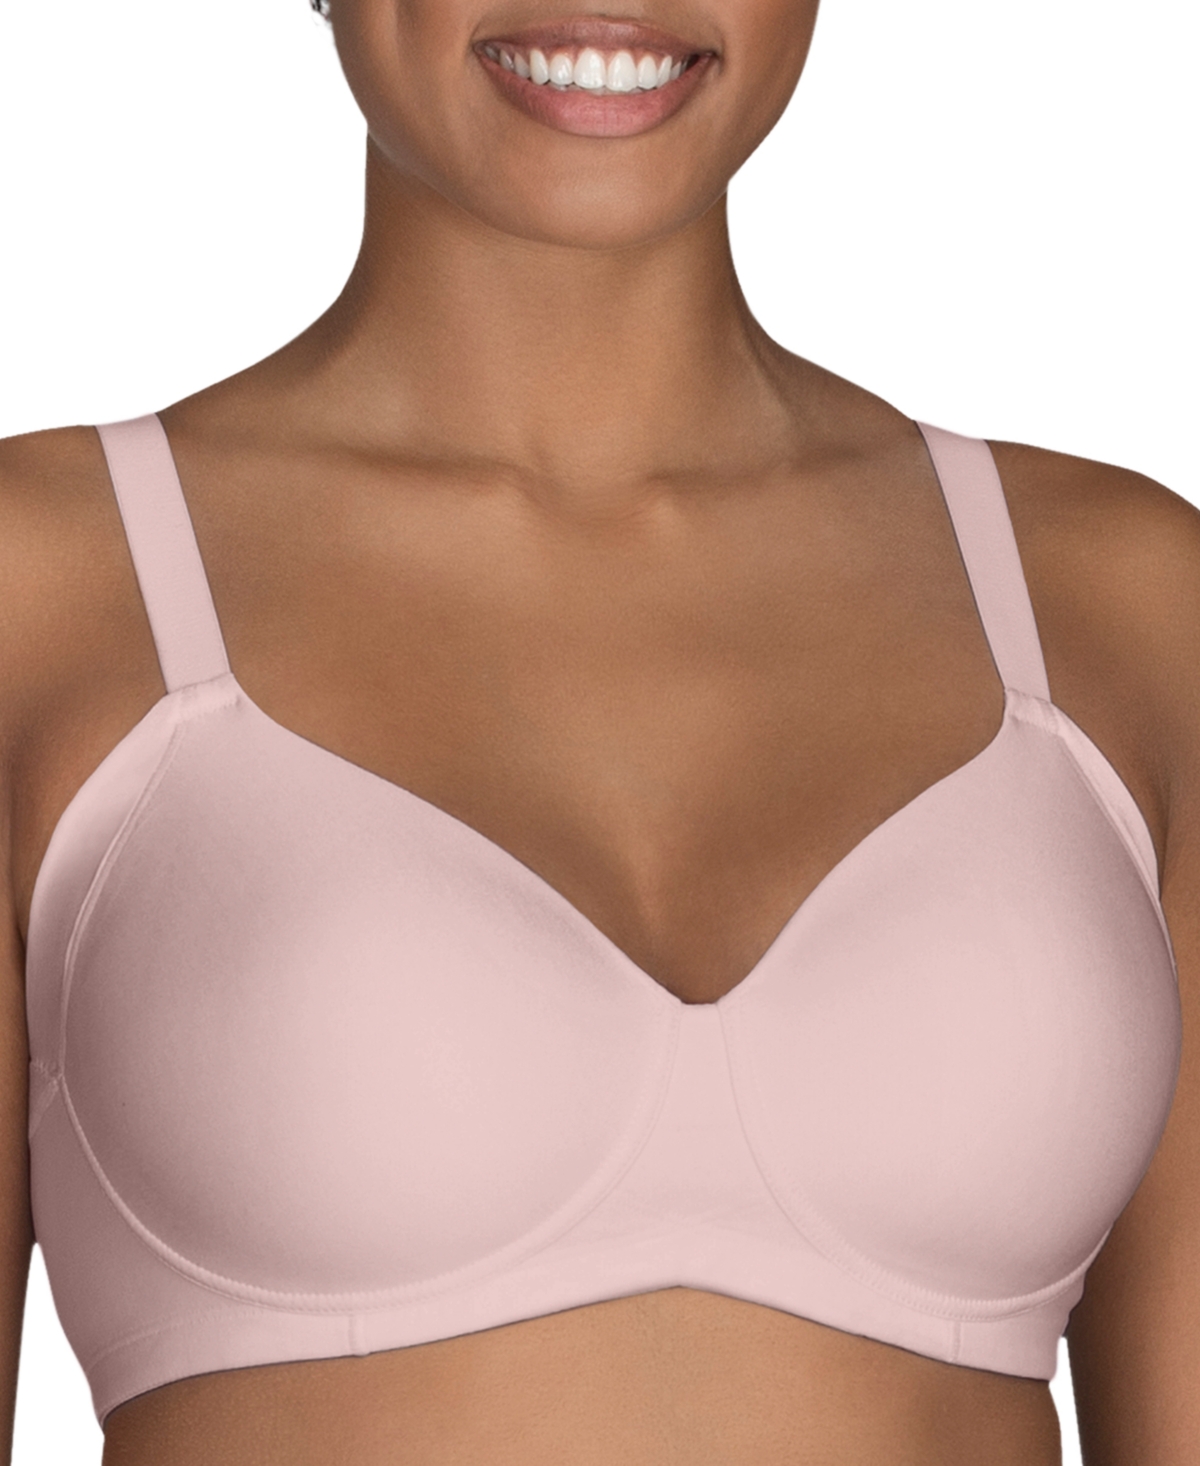 Women's Beauty Back Full Figure Wirefree Extended Side and Back Smoother Bra 71267 - Sheer Quartz